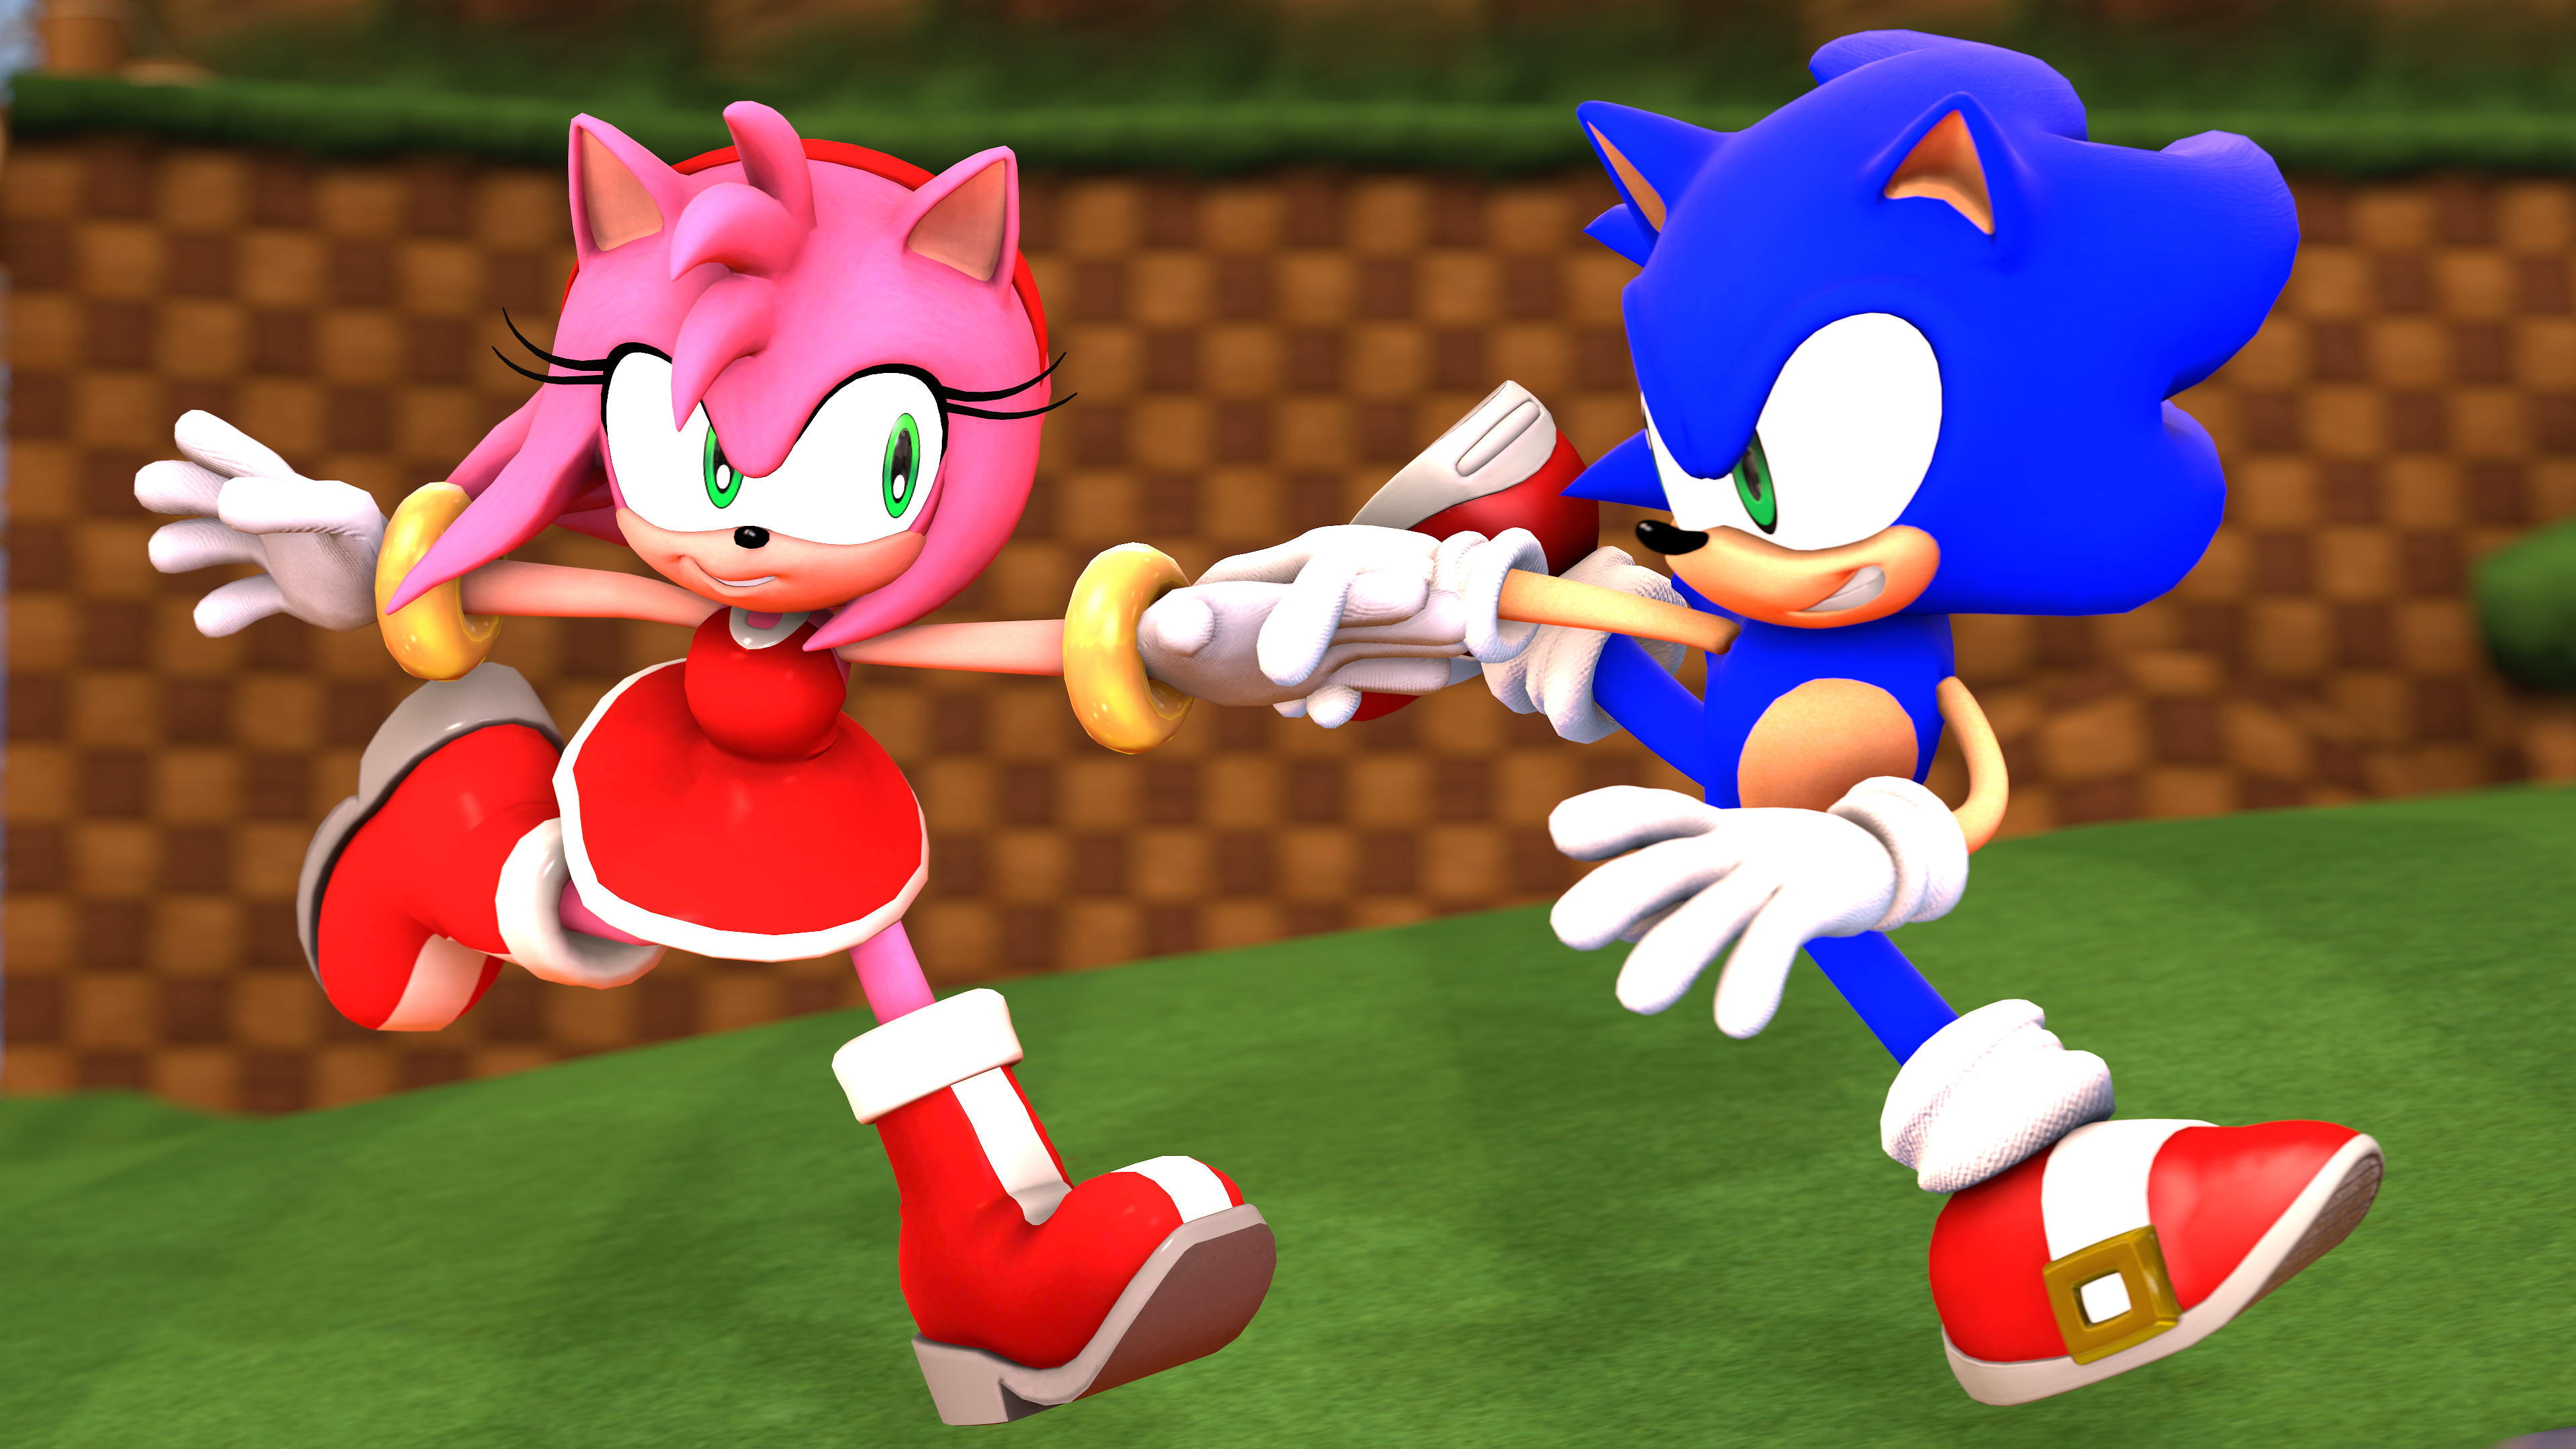 Sonic the Hedgehog Animation - AMY ROSE IN SONIC MANIA!? - SFM Animation 4K  